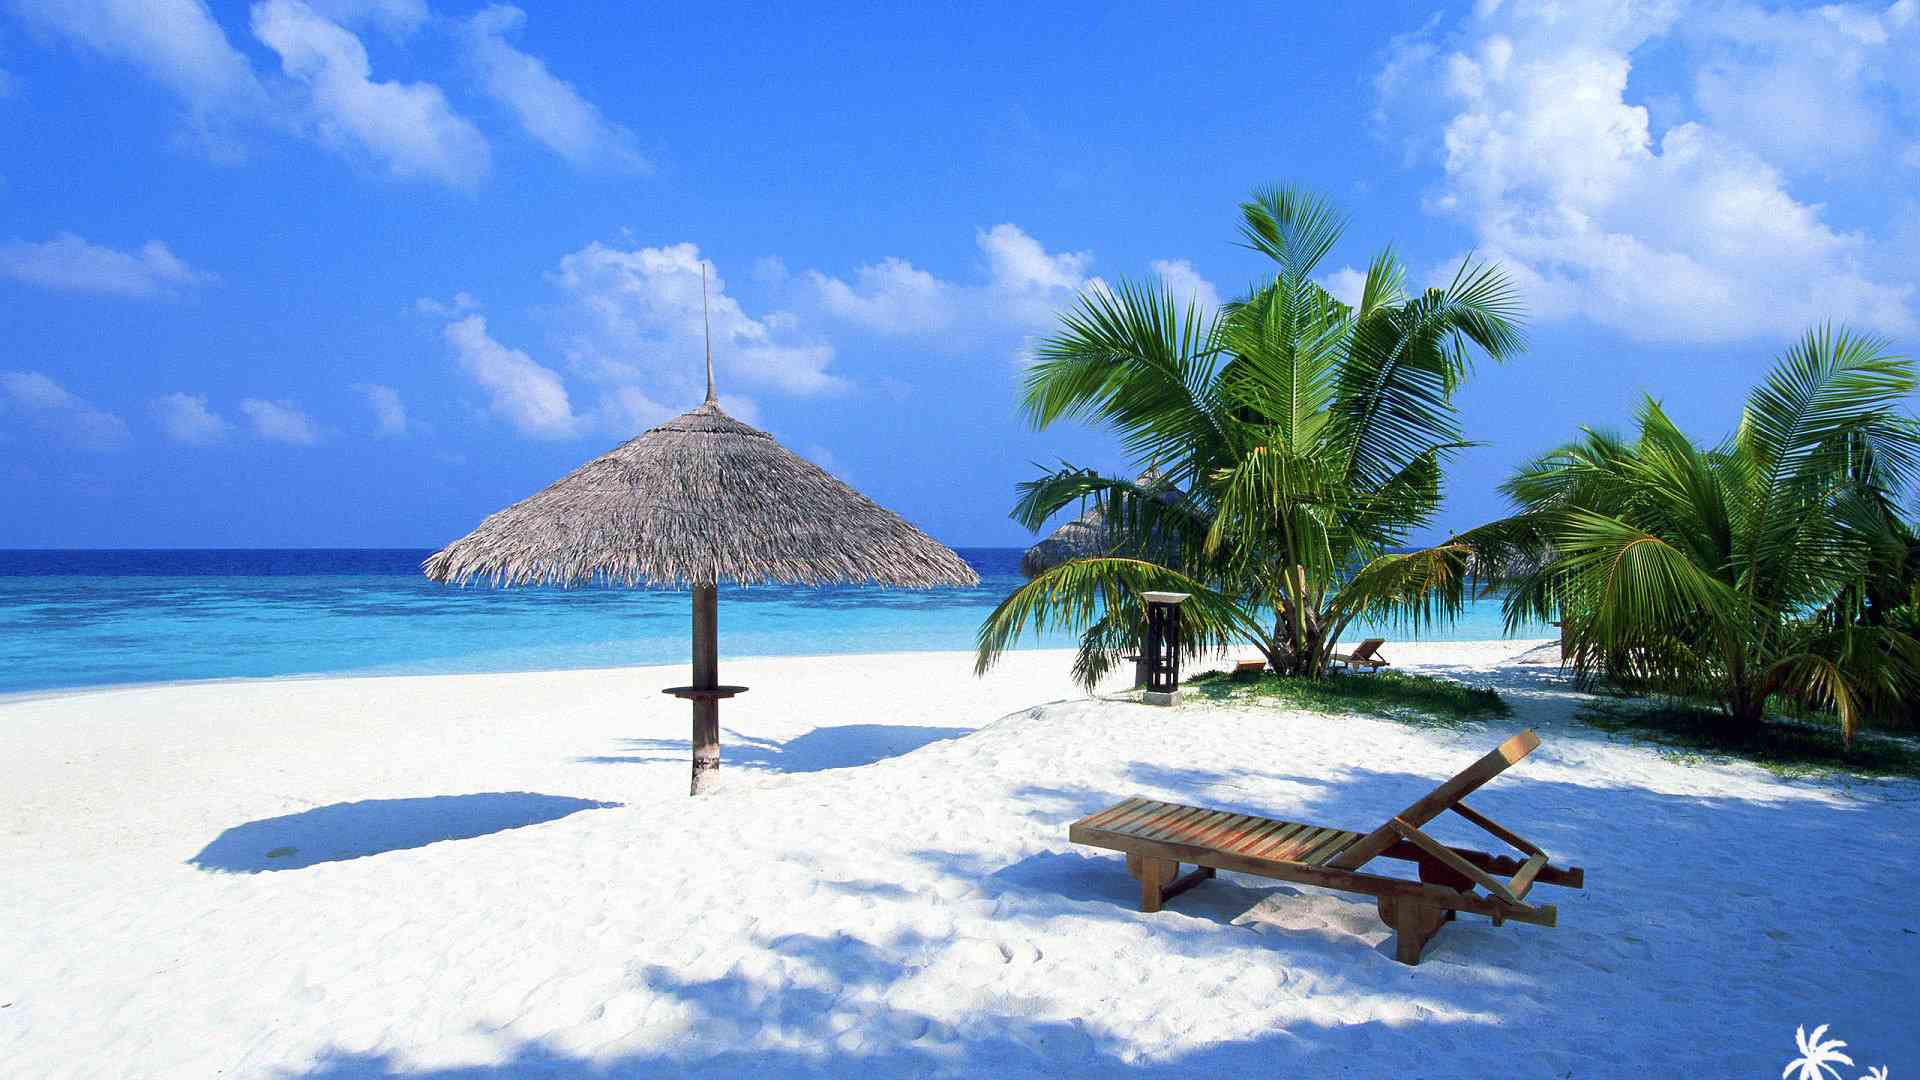 The Best Beach Background Wallpaper Of